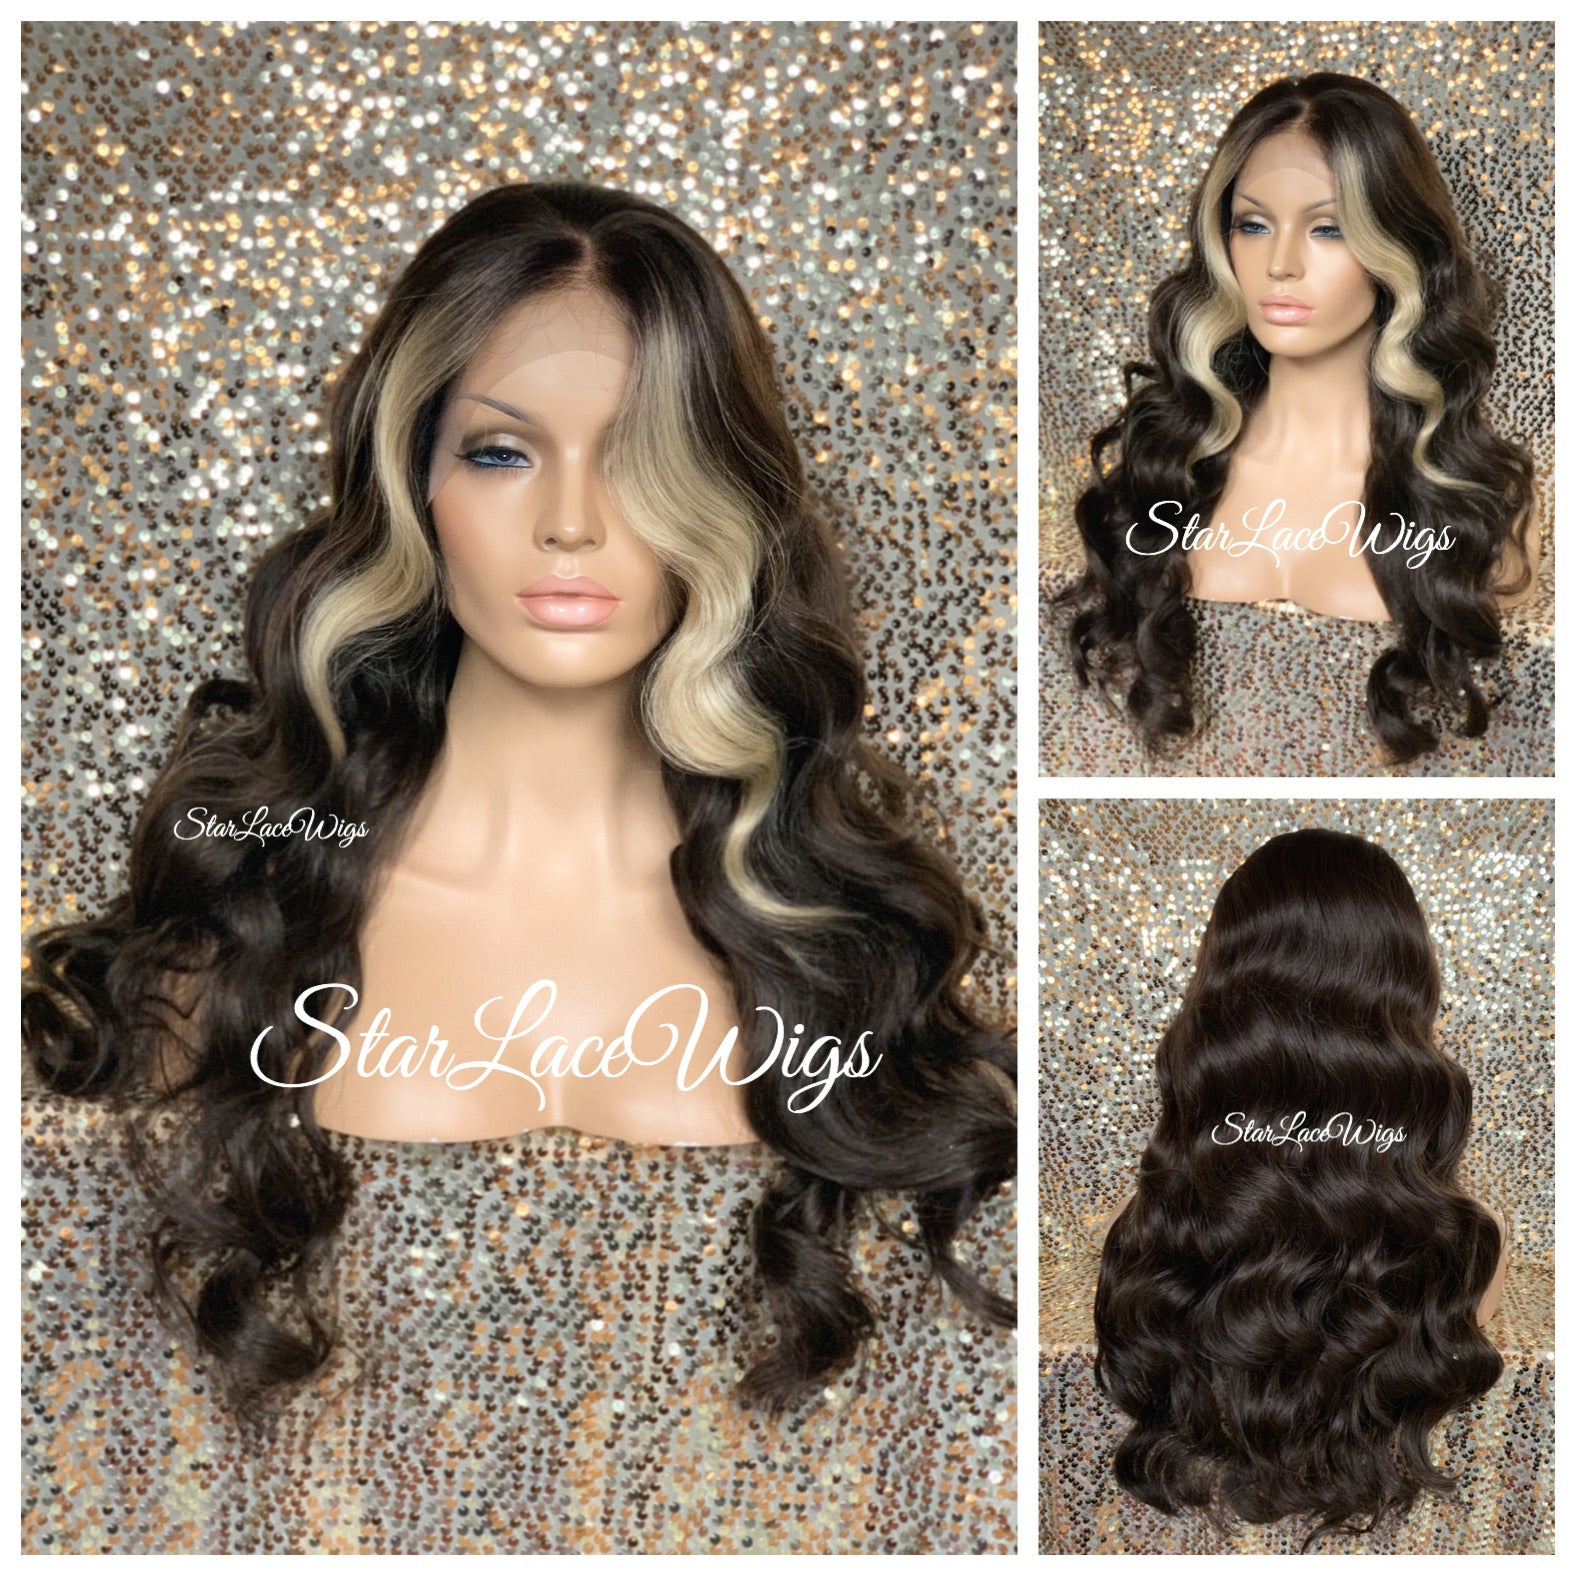 wavy brown hair with blonde highlights